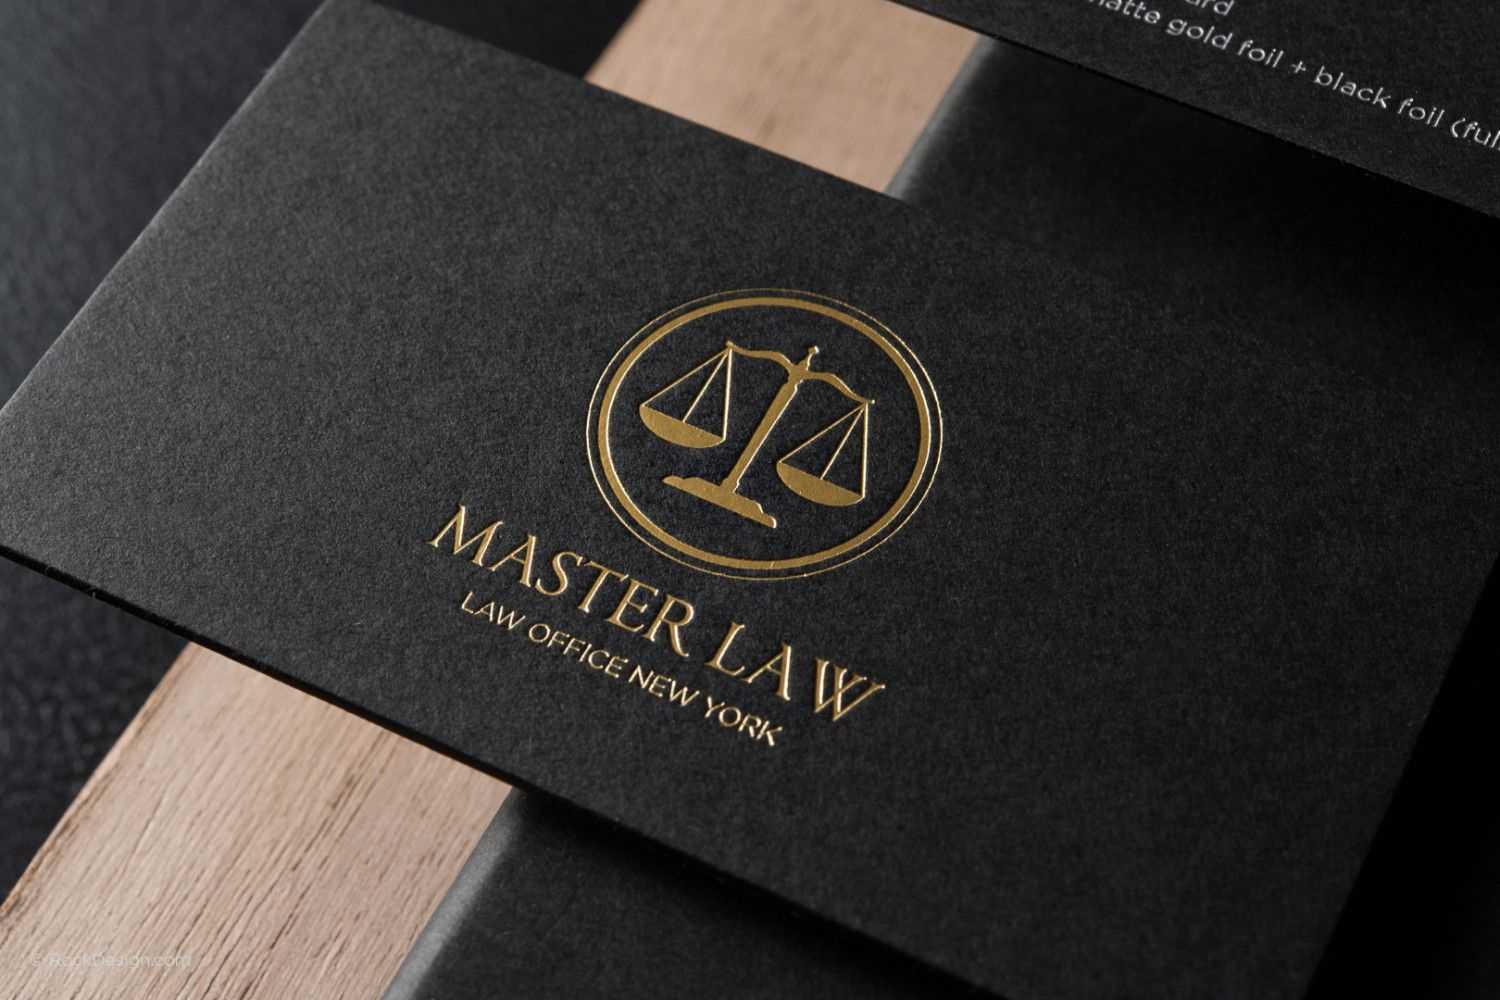 Free Lawyer Business Card Template | Rockdesign | Lawyer With Regard To Legal Business Cards Templates Free